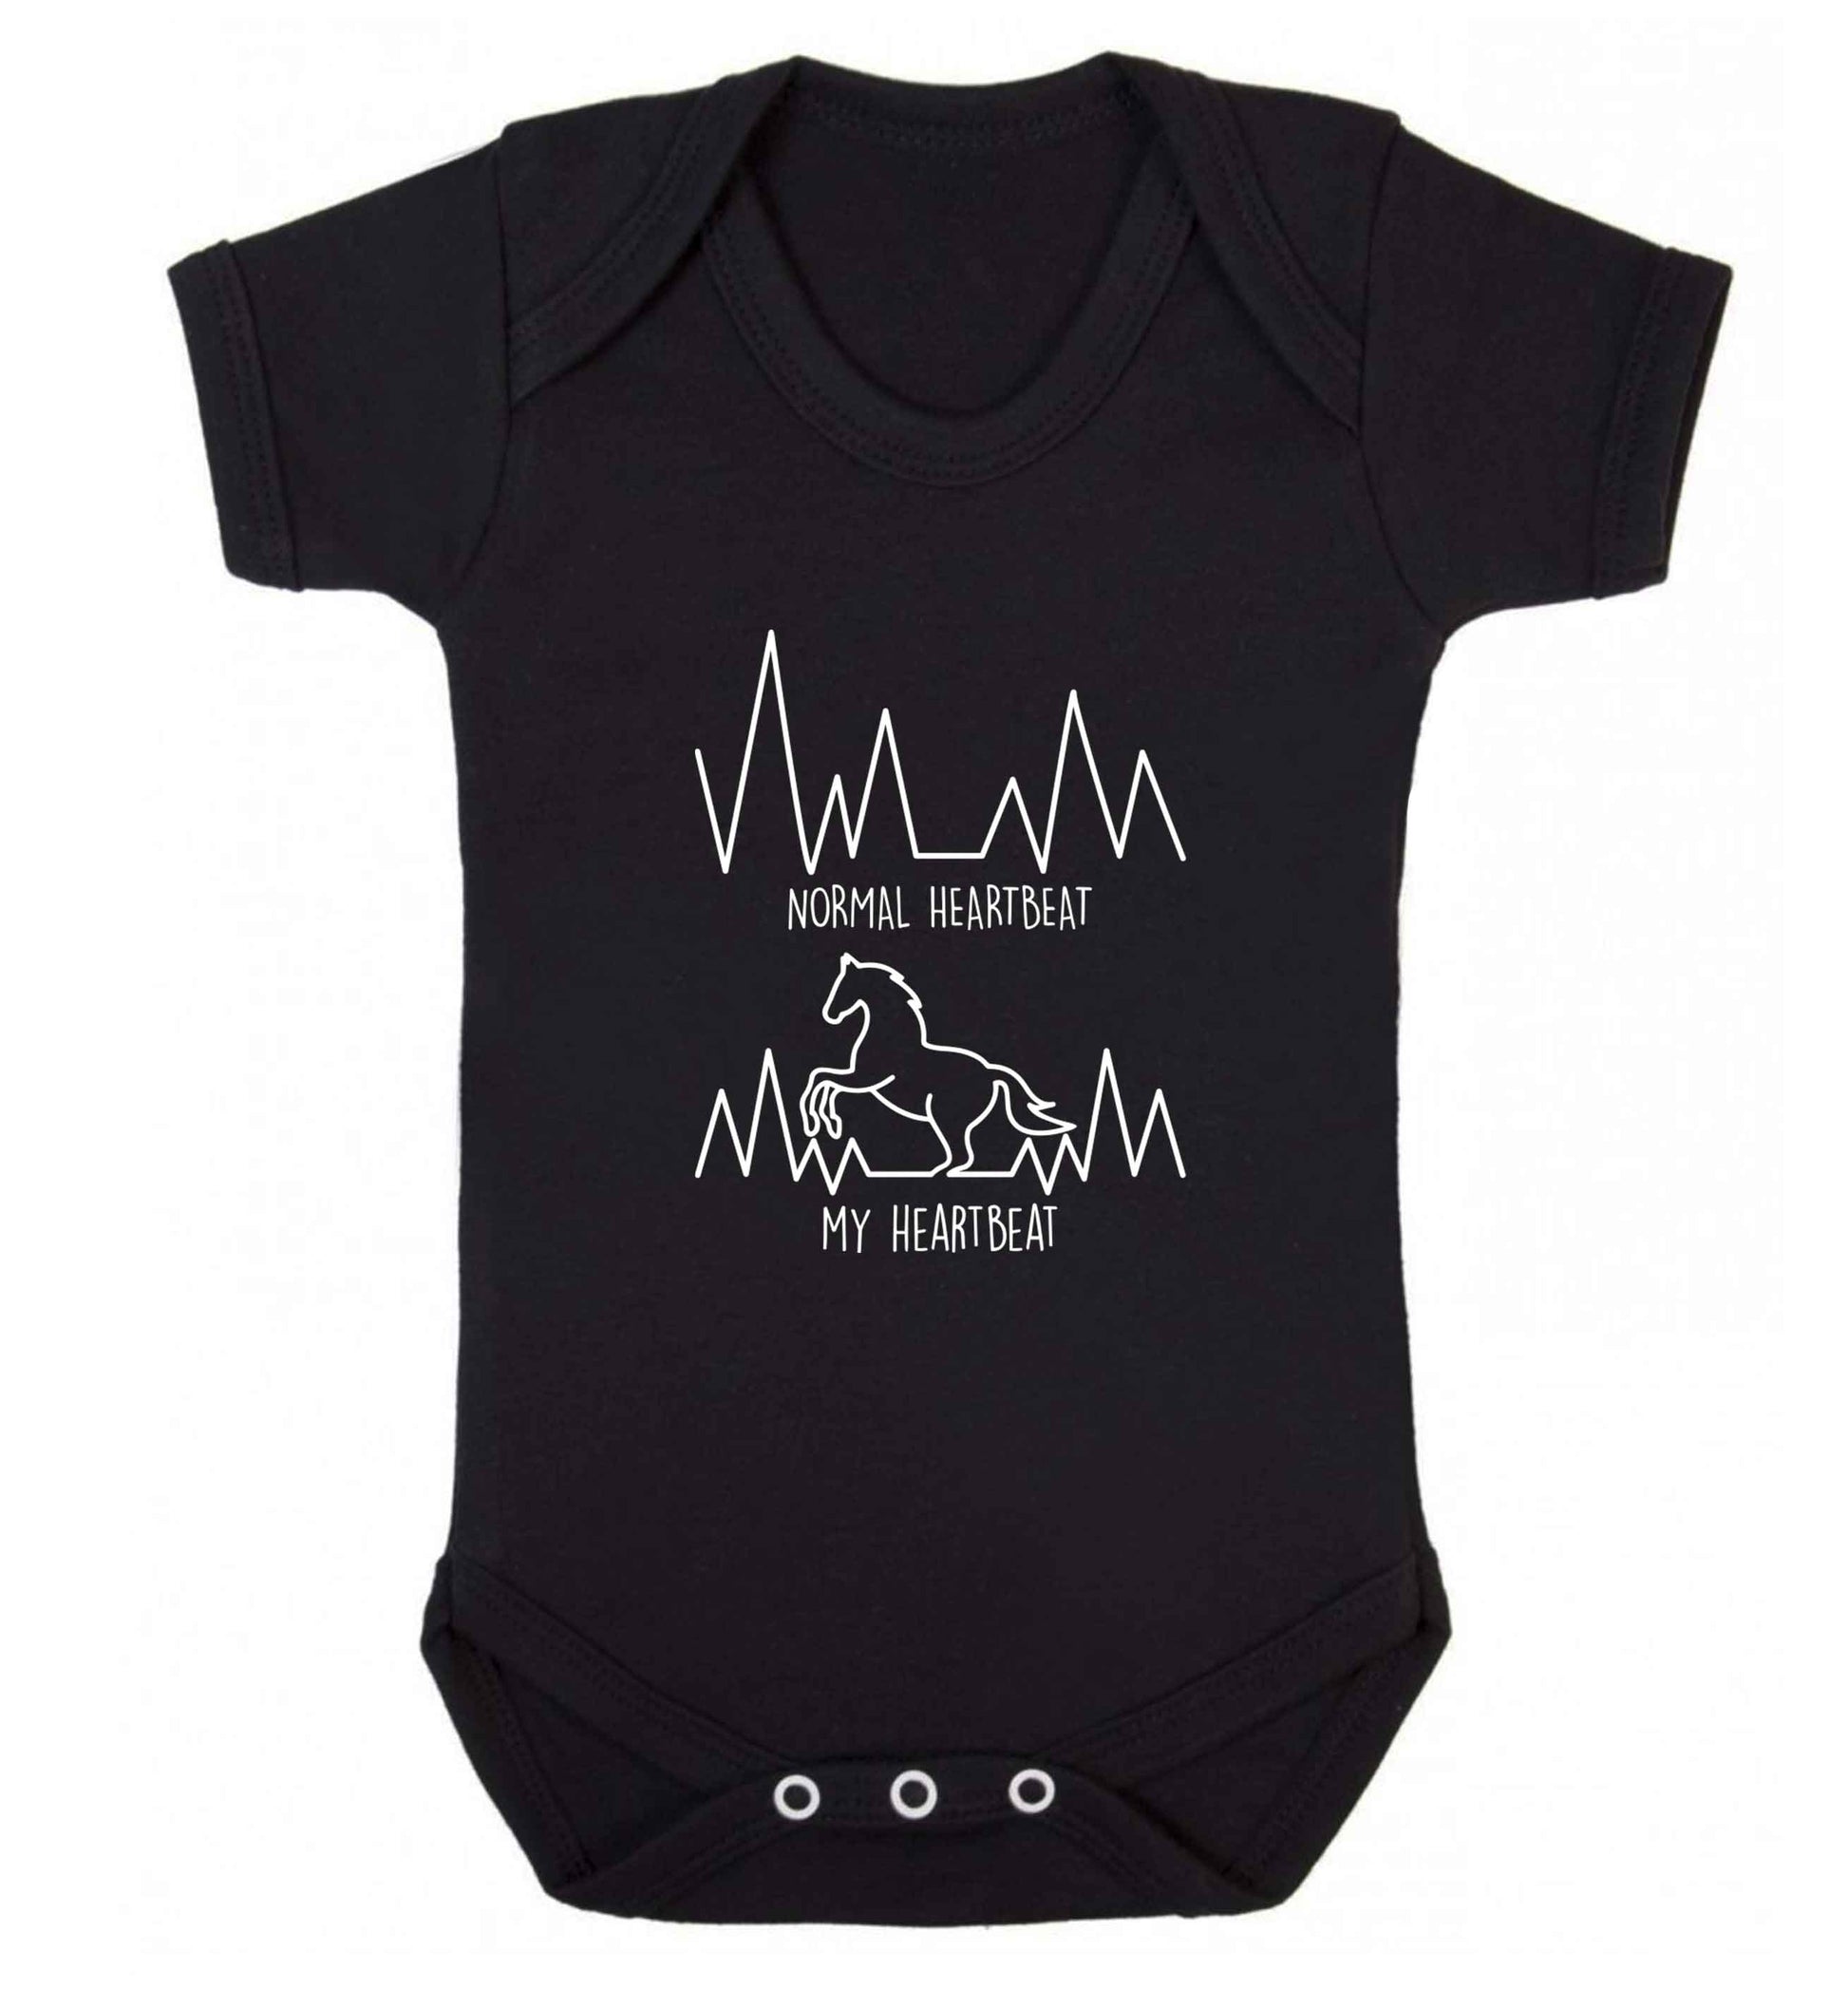 Horse - Normal heartbeat my heartbeat baby vest black 18-24 months